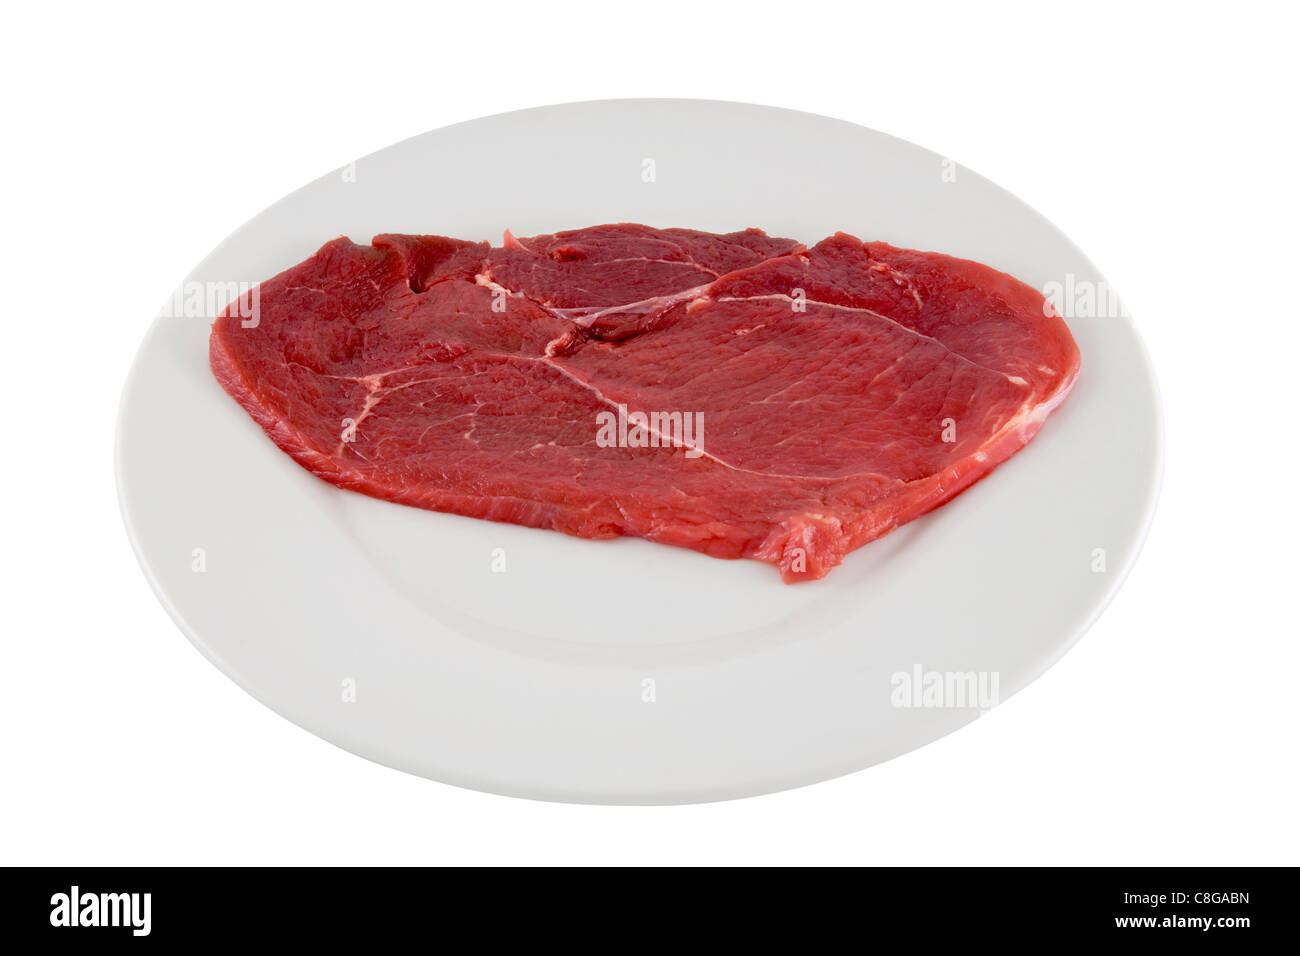 https://c8.alamy.com/comp/C8GABN/raw-beef-schnitzel-on-white-plate-image-is-isolated-on-white-background-C8GABN.jpg